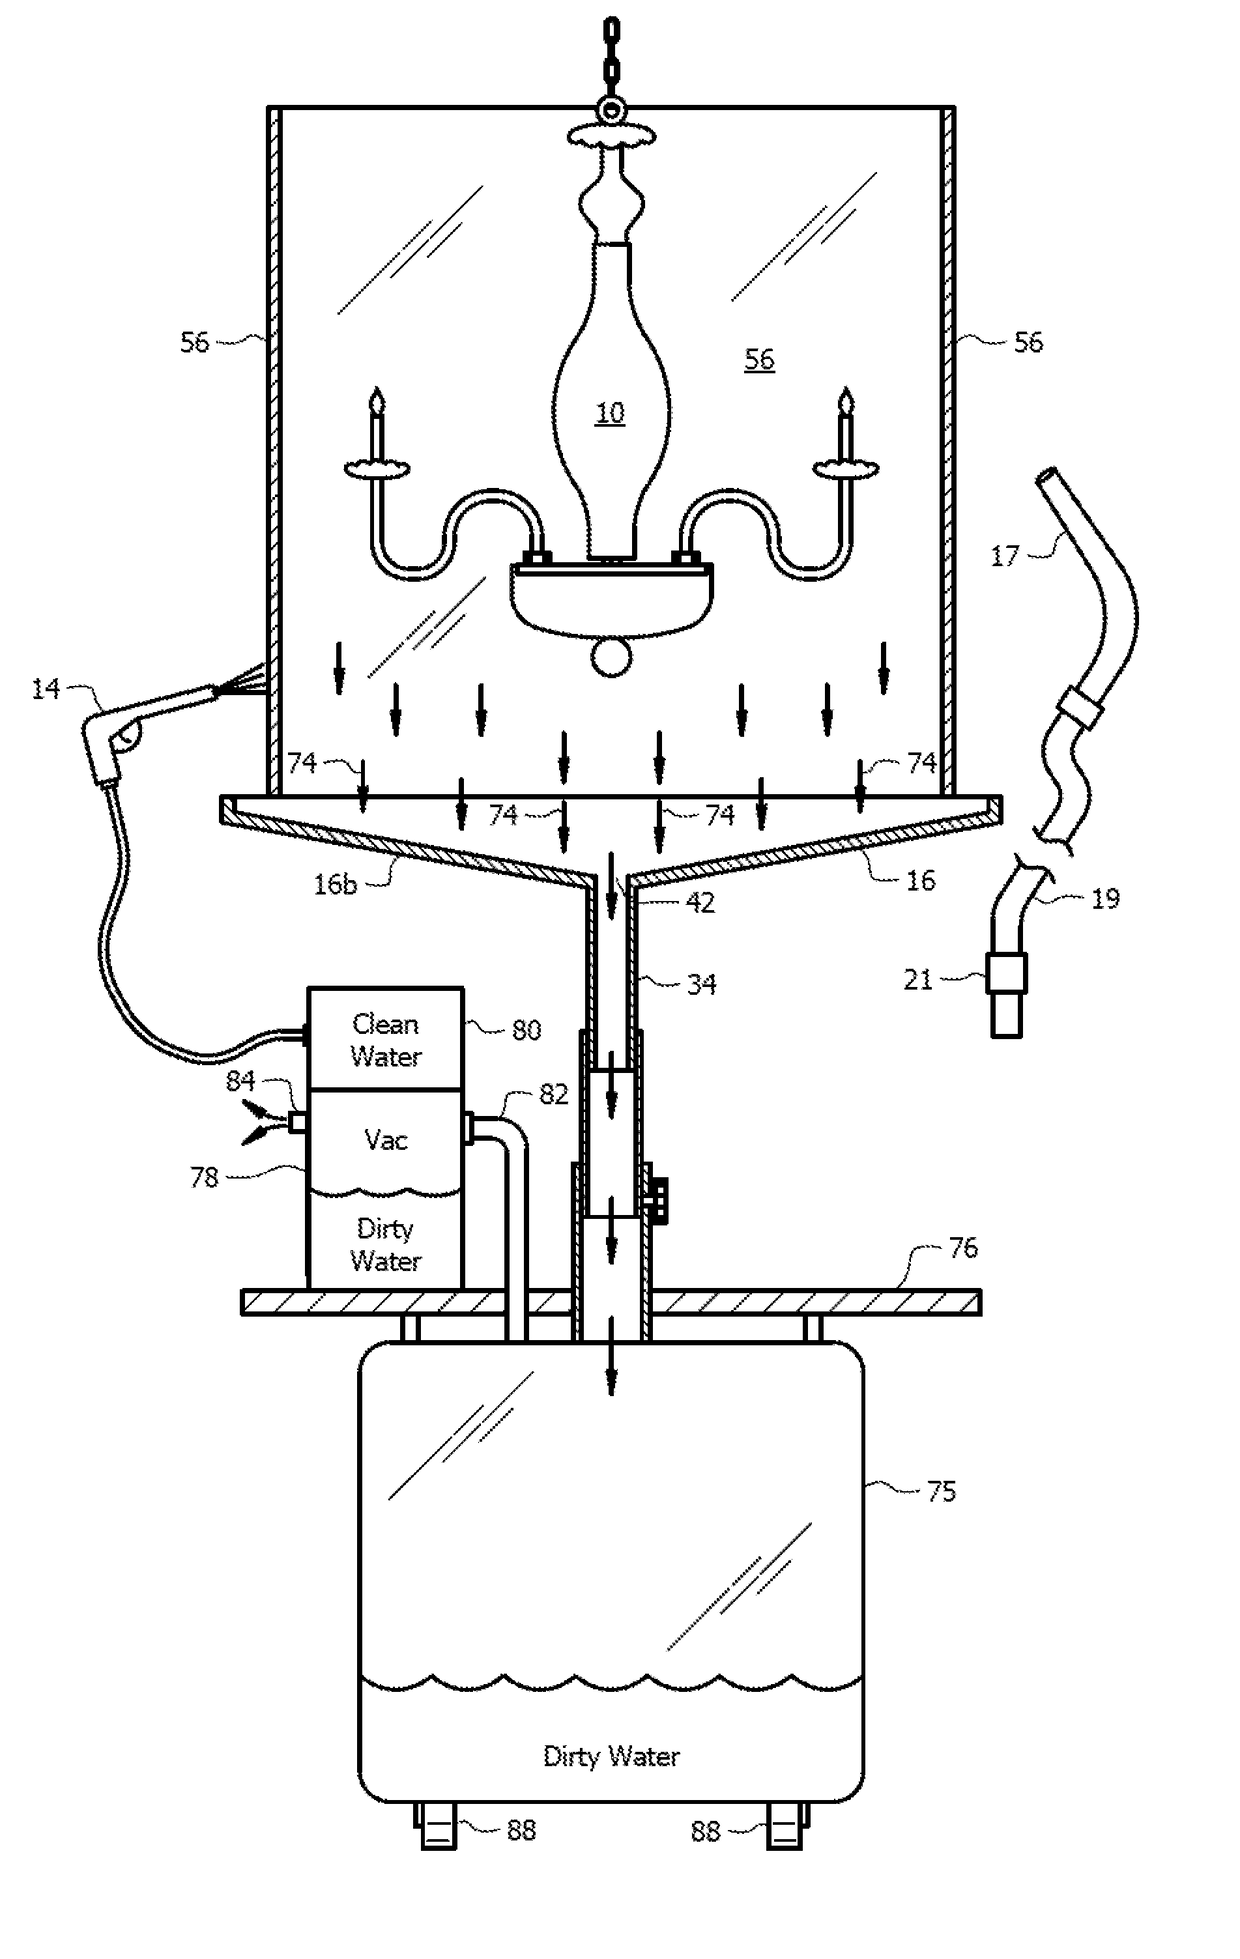 Directional atomizer system for cleaning chandeliers